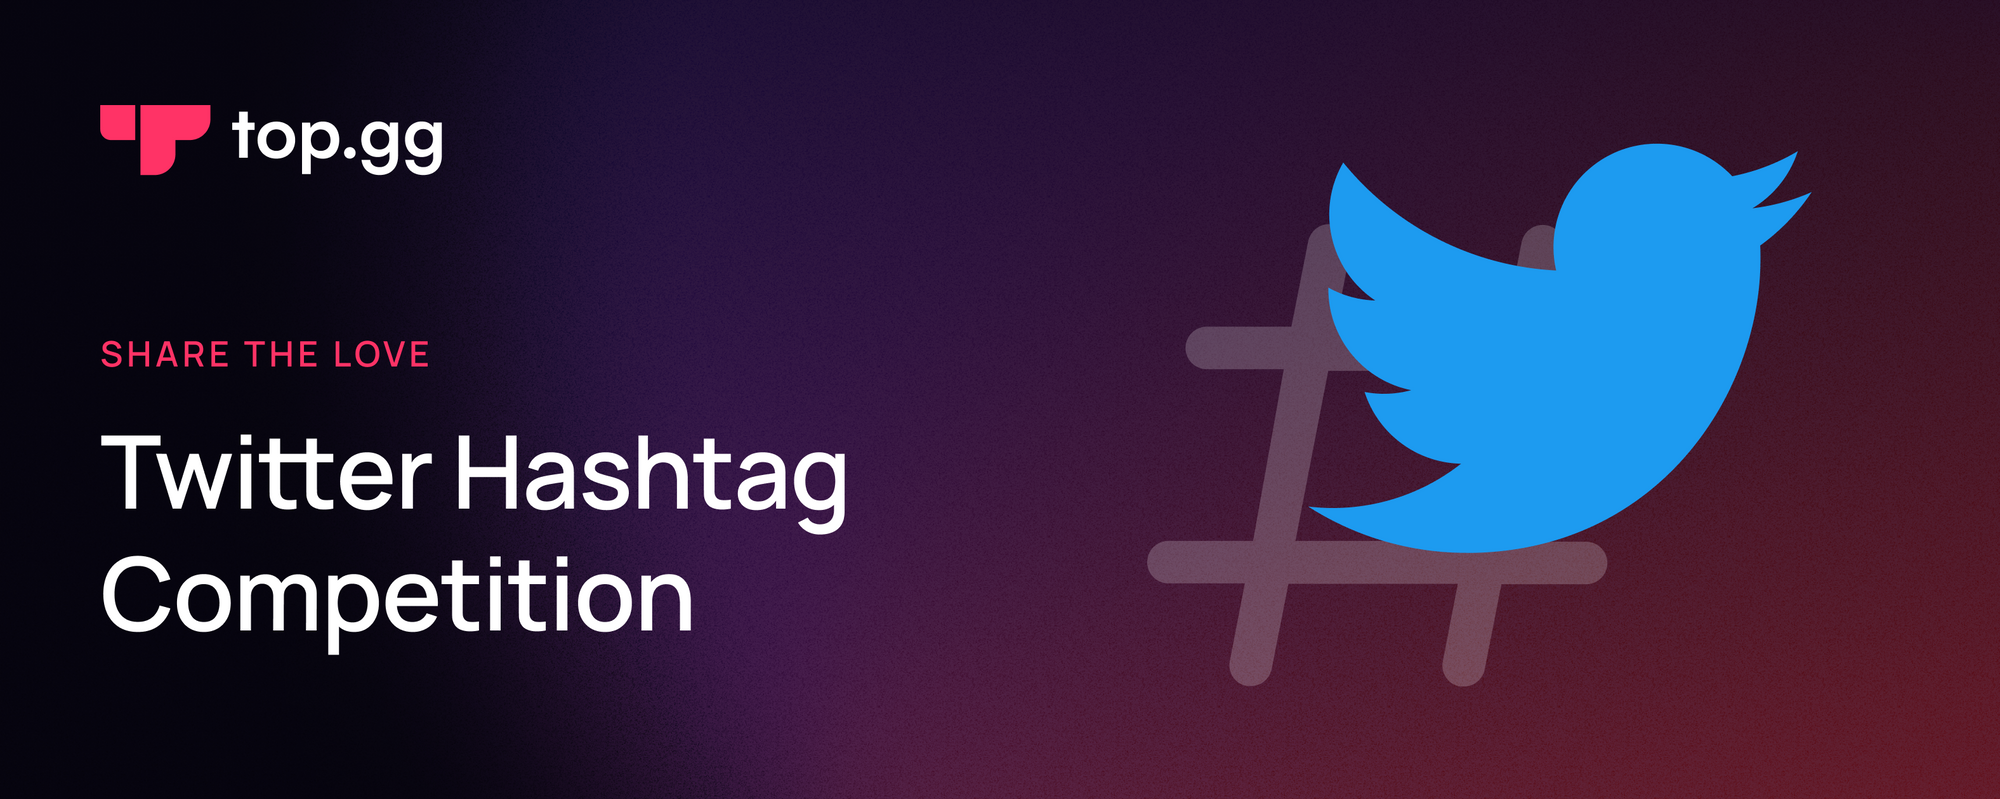 Twitter Competition Terms and Conditions